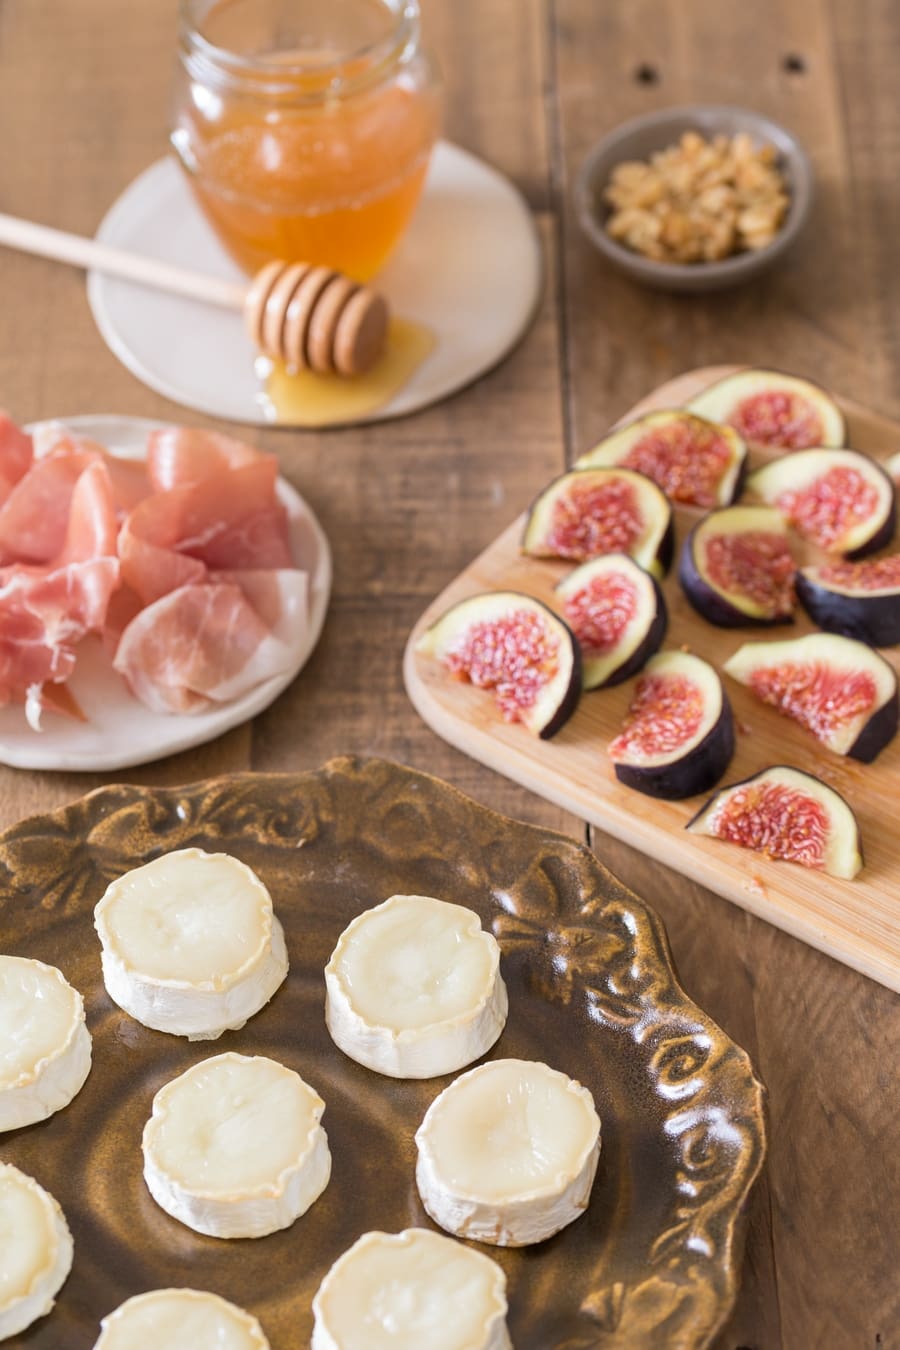 Baked goat cheese log, sliced figs, prosciutto and honey.